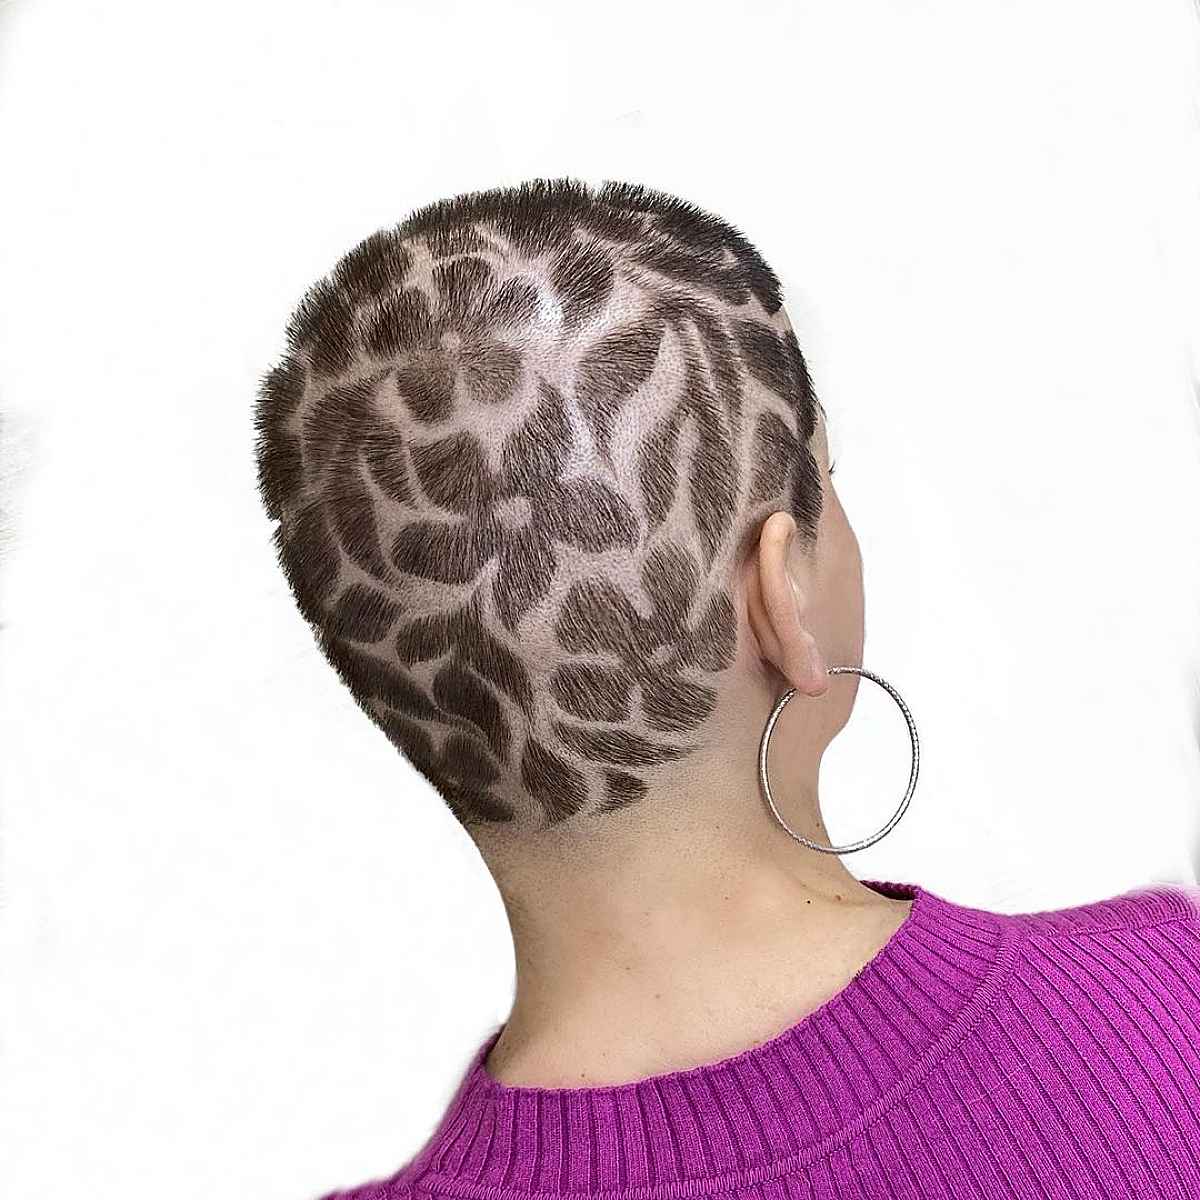 Shaved Head with Designs